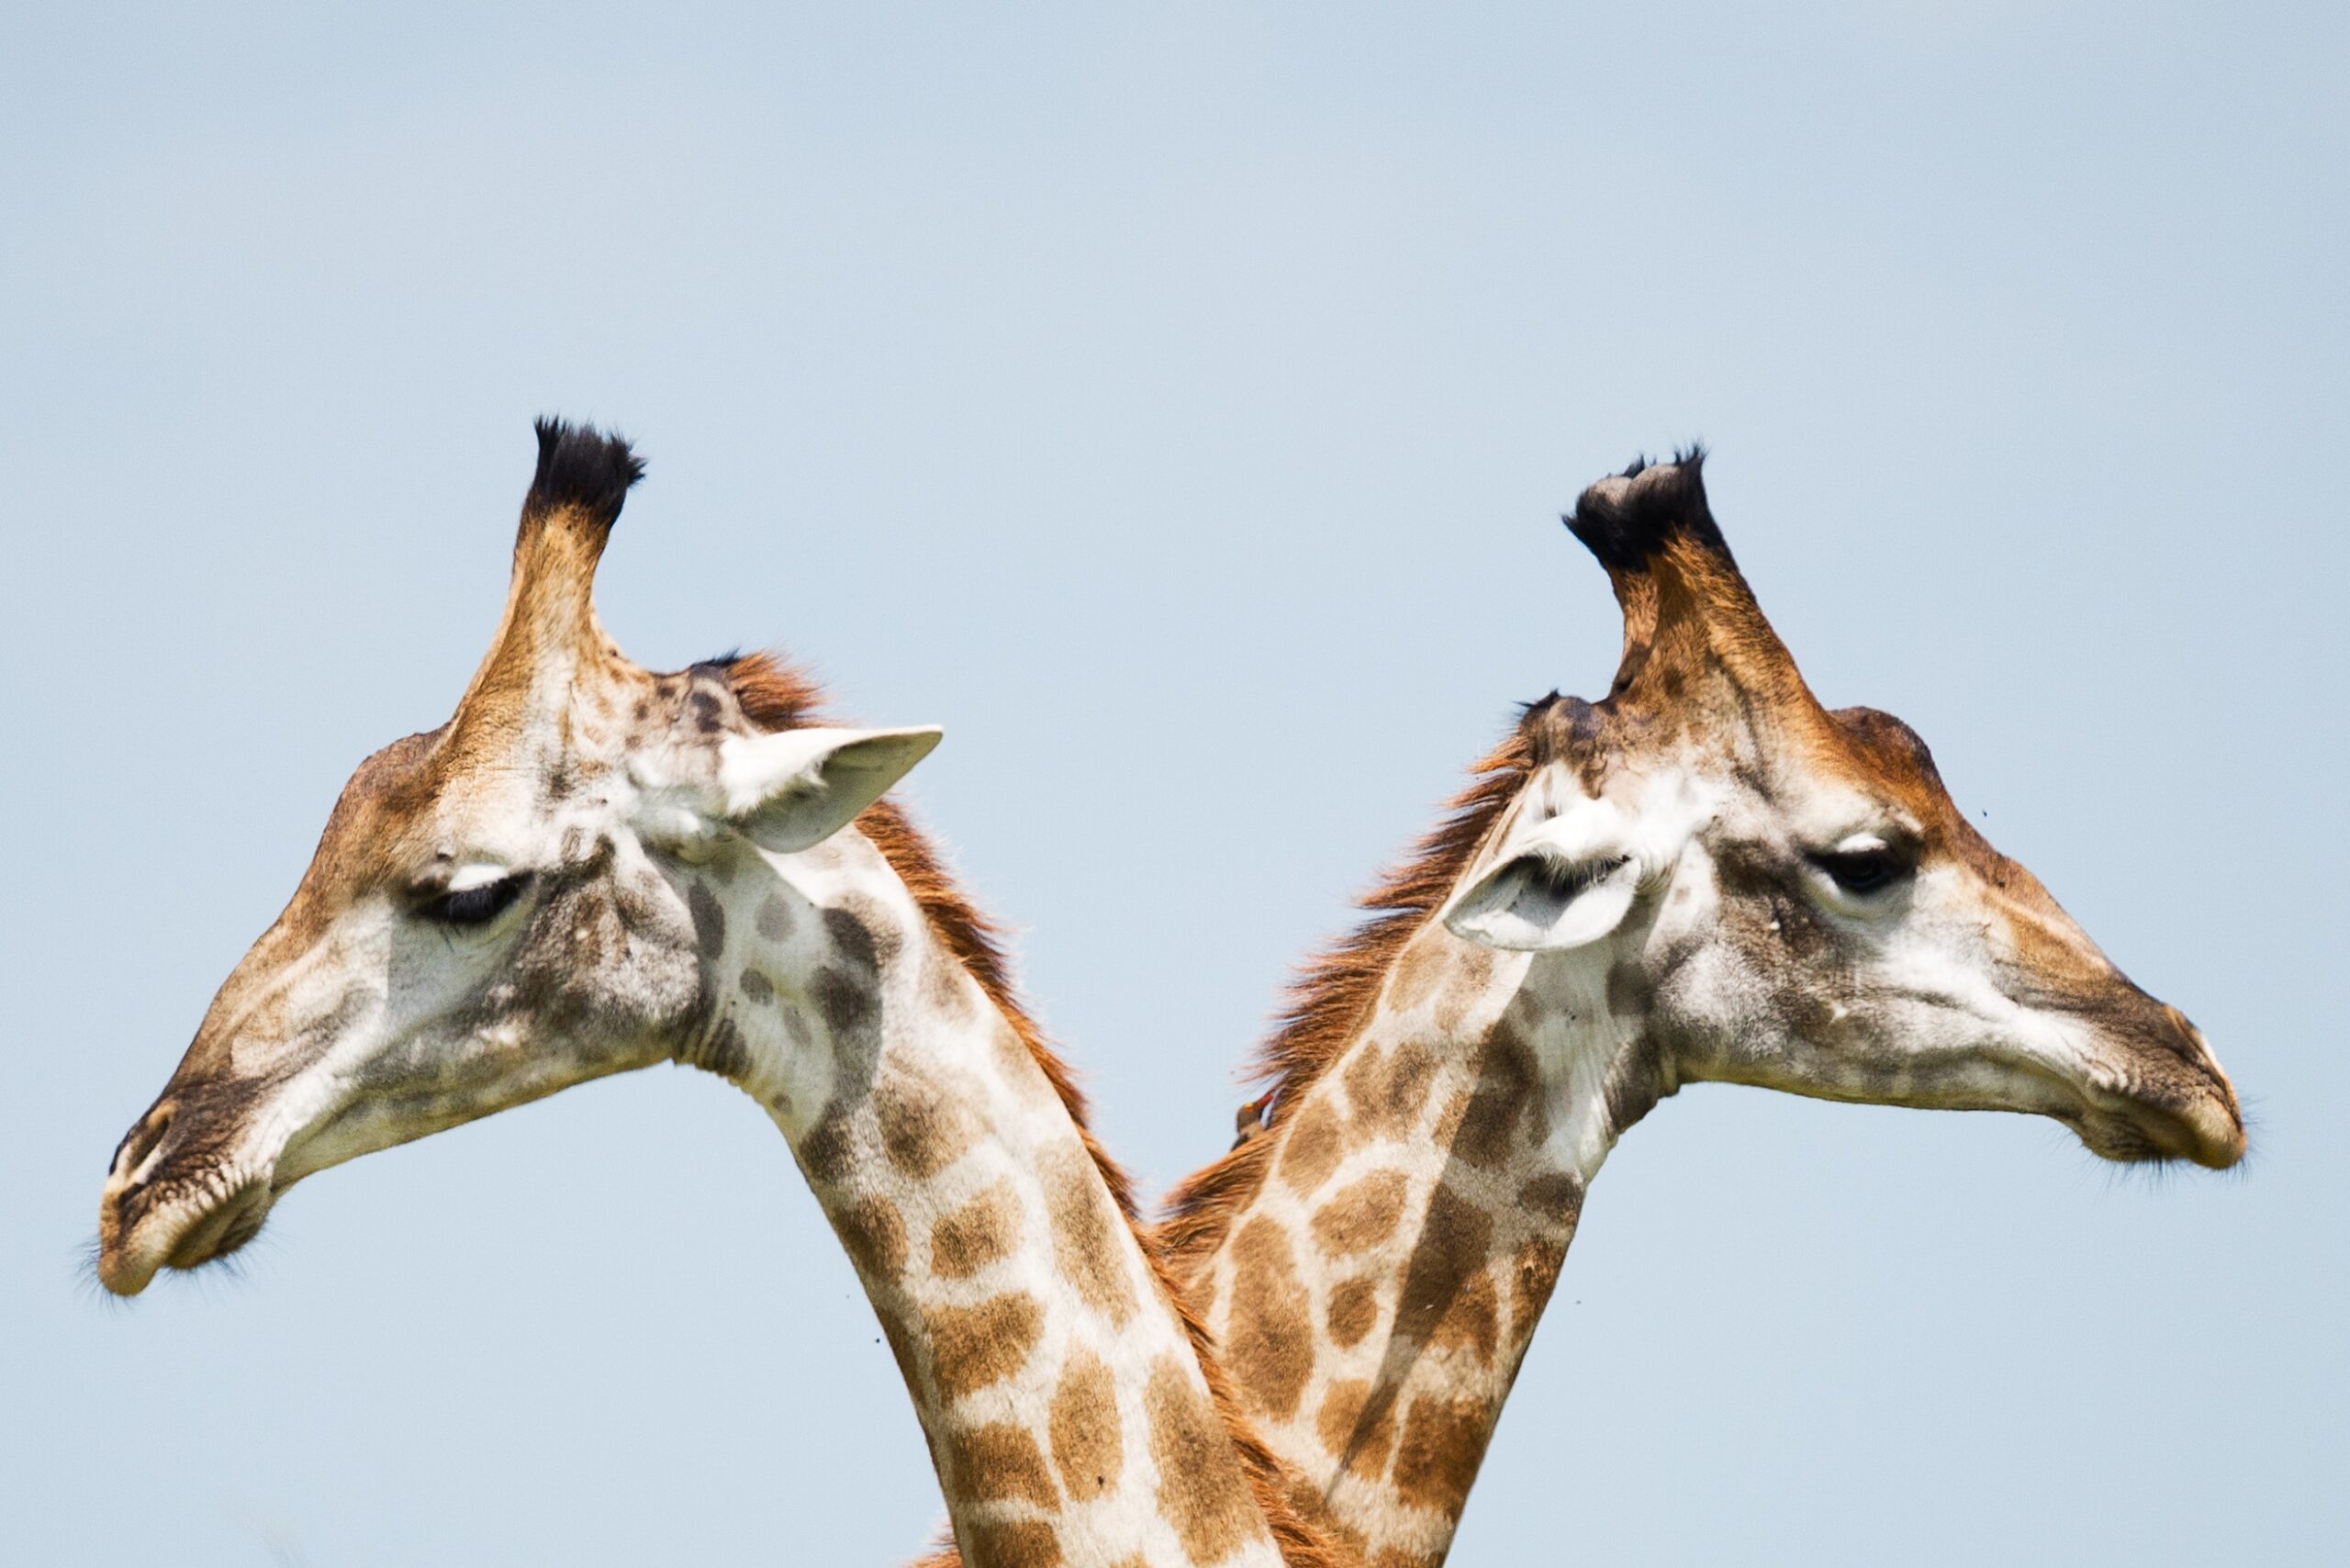 The picture is of two giraffes looking in opposite directions. This represents the differences between banks and custodians.